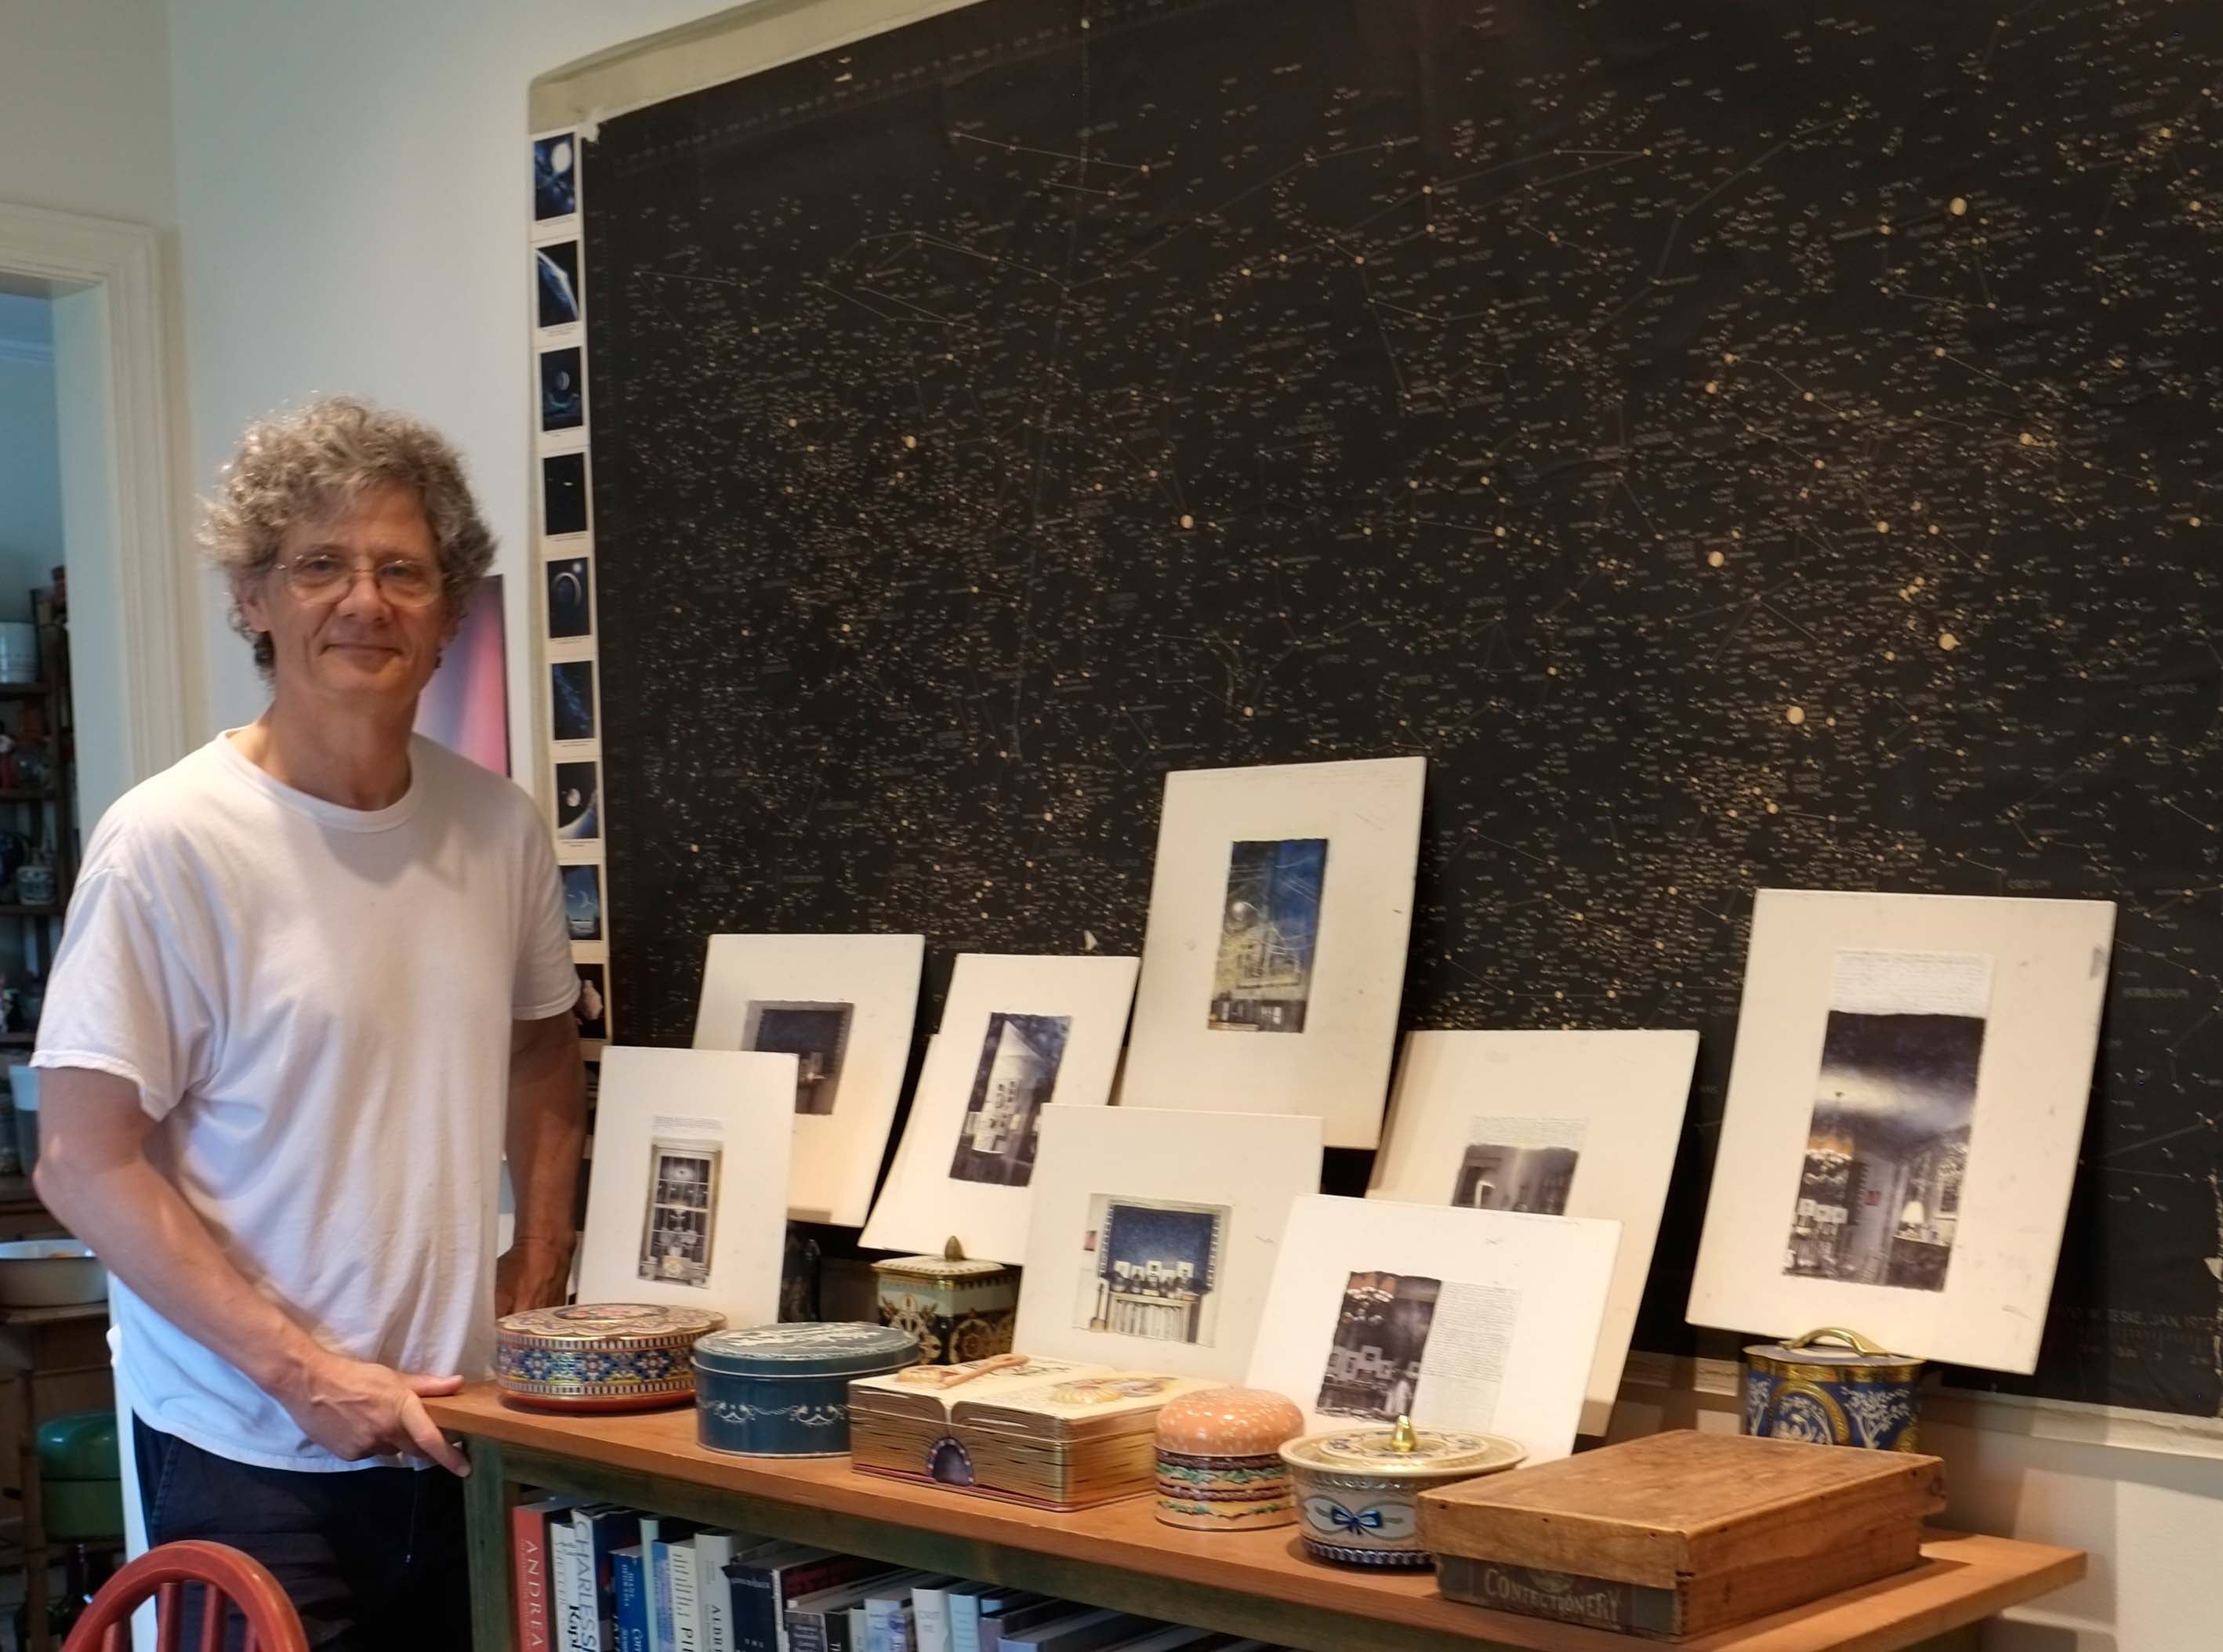 Photograph of Charles Ritchie with Star Map and Drawings, 2017. See Instagram Artist Feature @Jason Haam. image